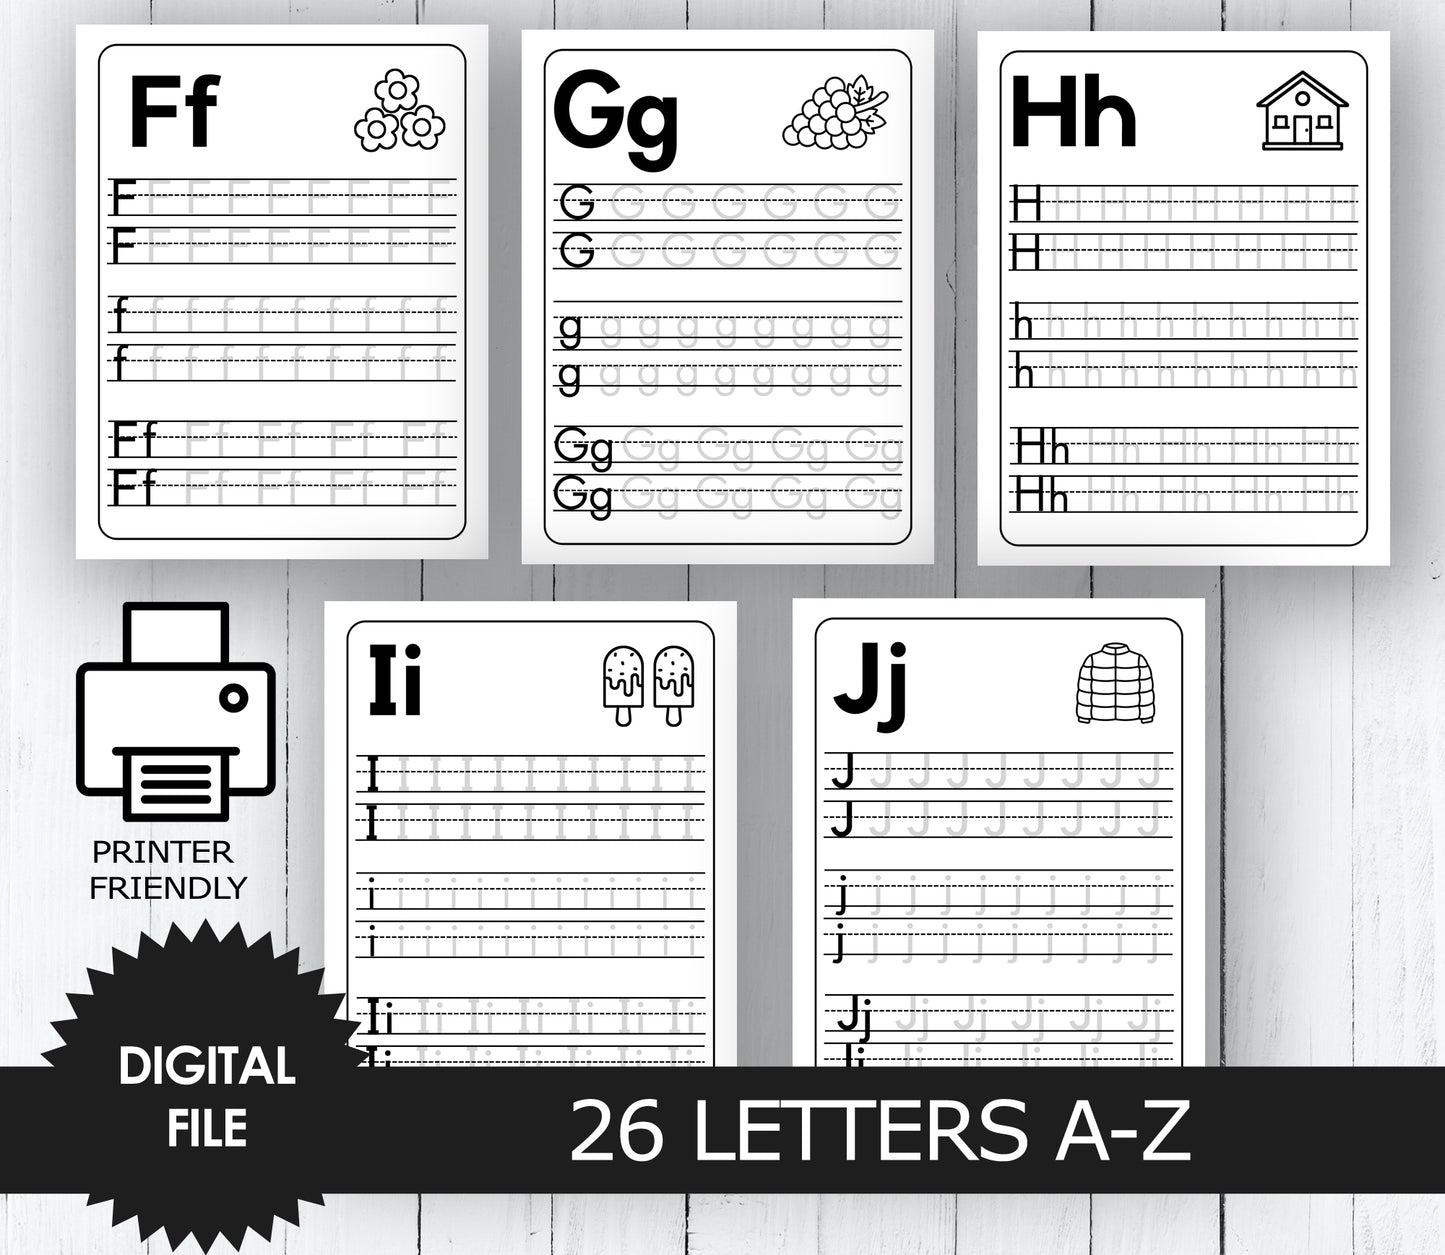 Alphabet Letter Tracing A-Z, Uppercase and Lowercase, Kindergarten and Preschool Worksheets preview F-J